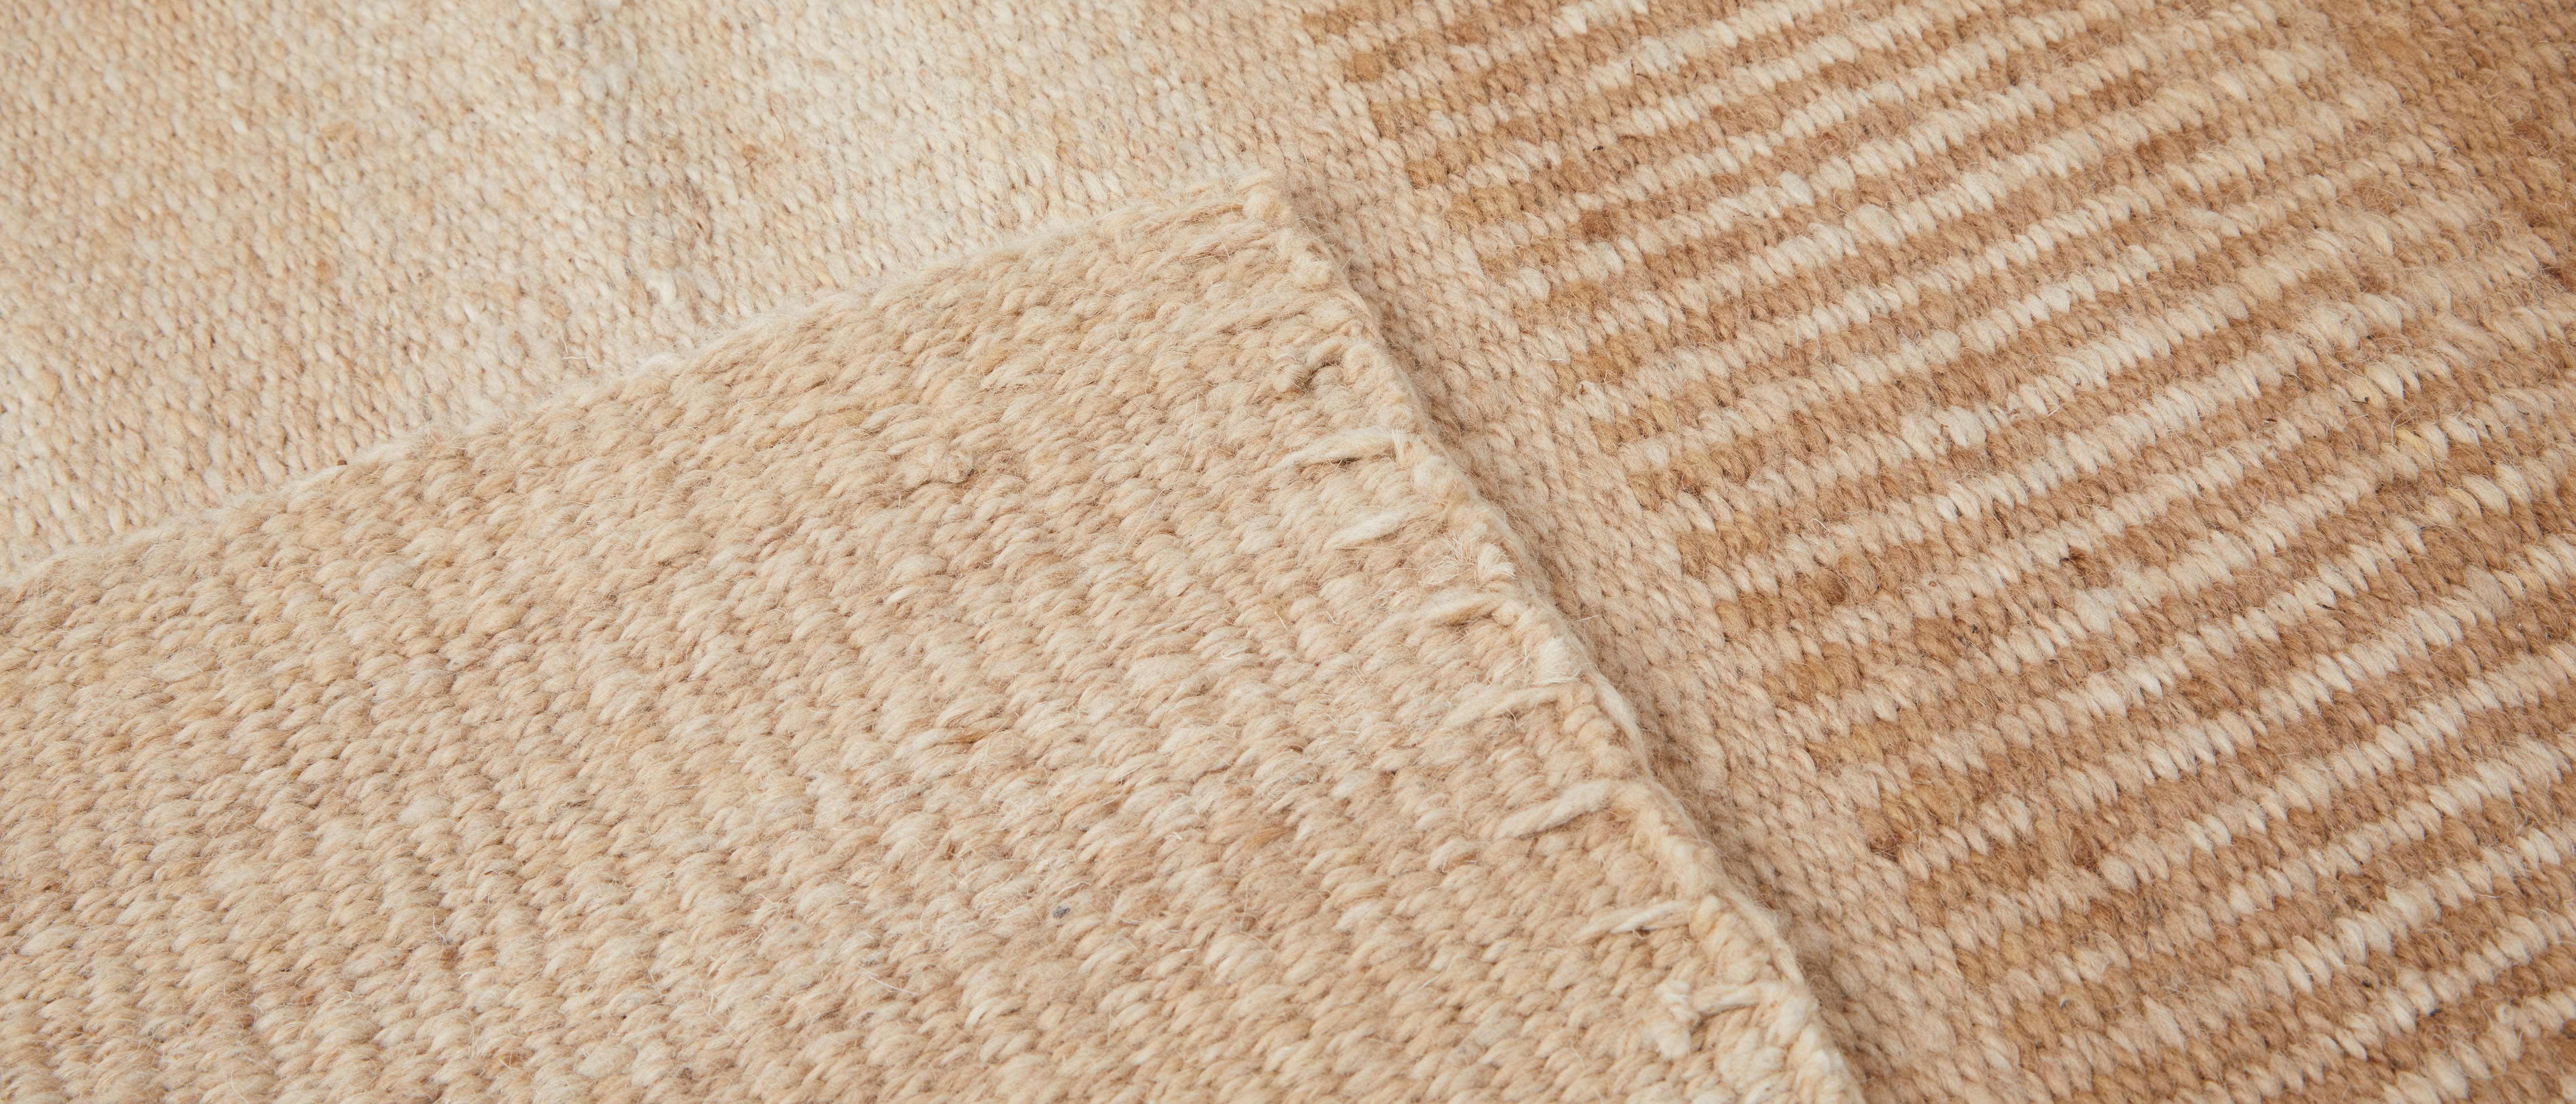 Detail Hand-woven carpet "Cuyo" from 100% sheep's wool